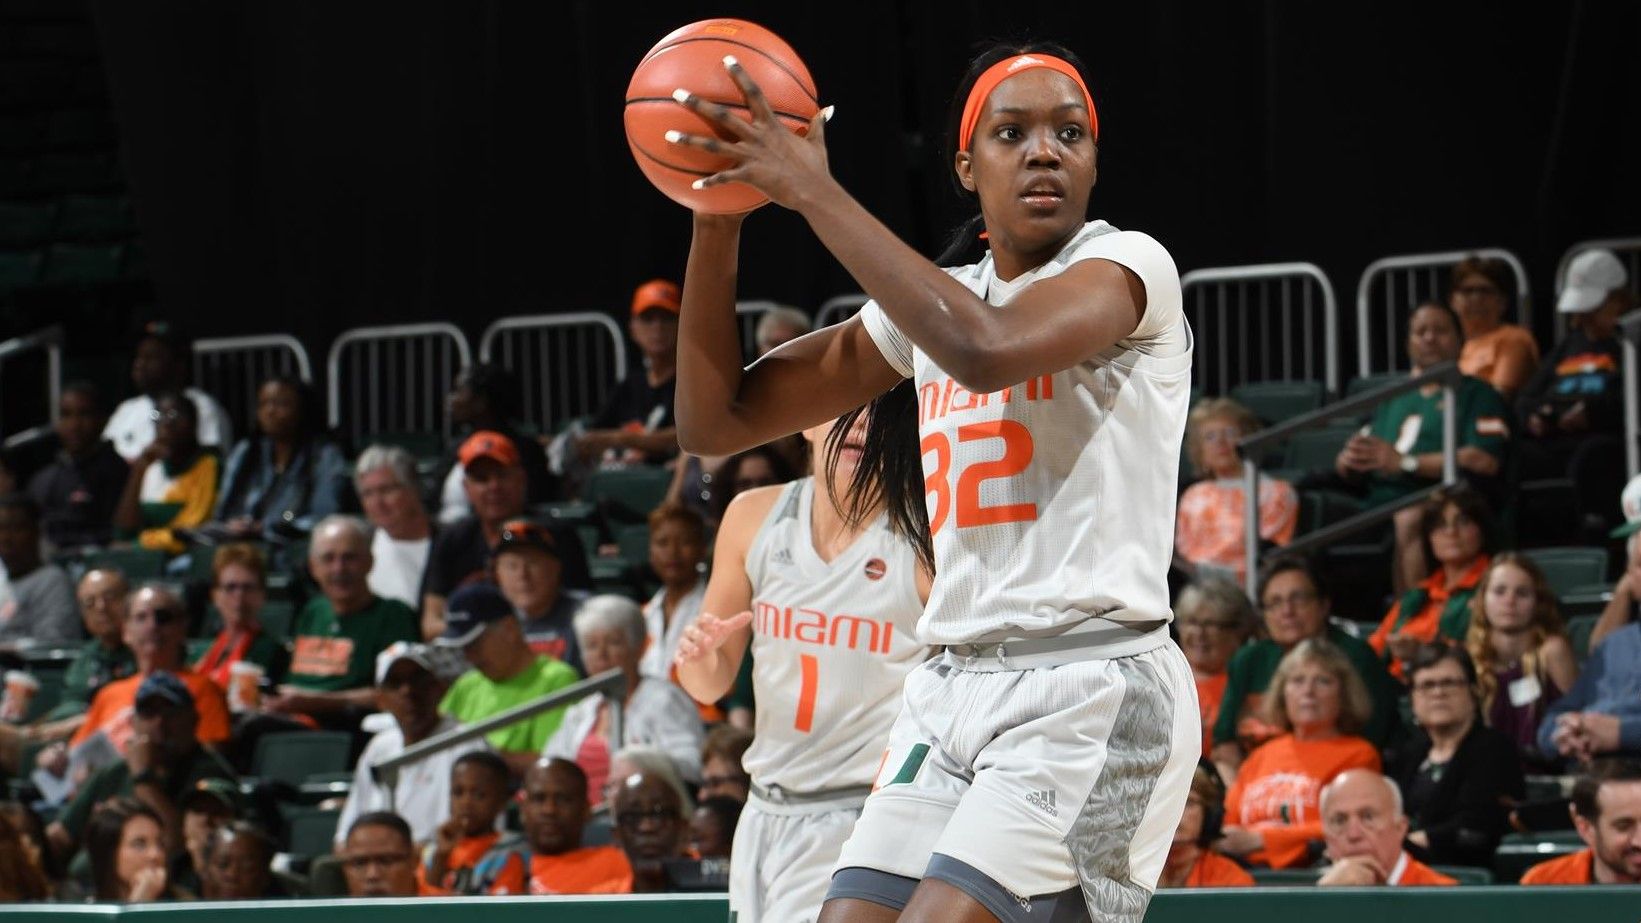 WBB Meets Virginia Tech in Third Straight Road Game